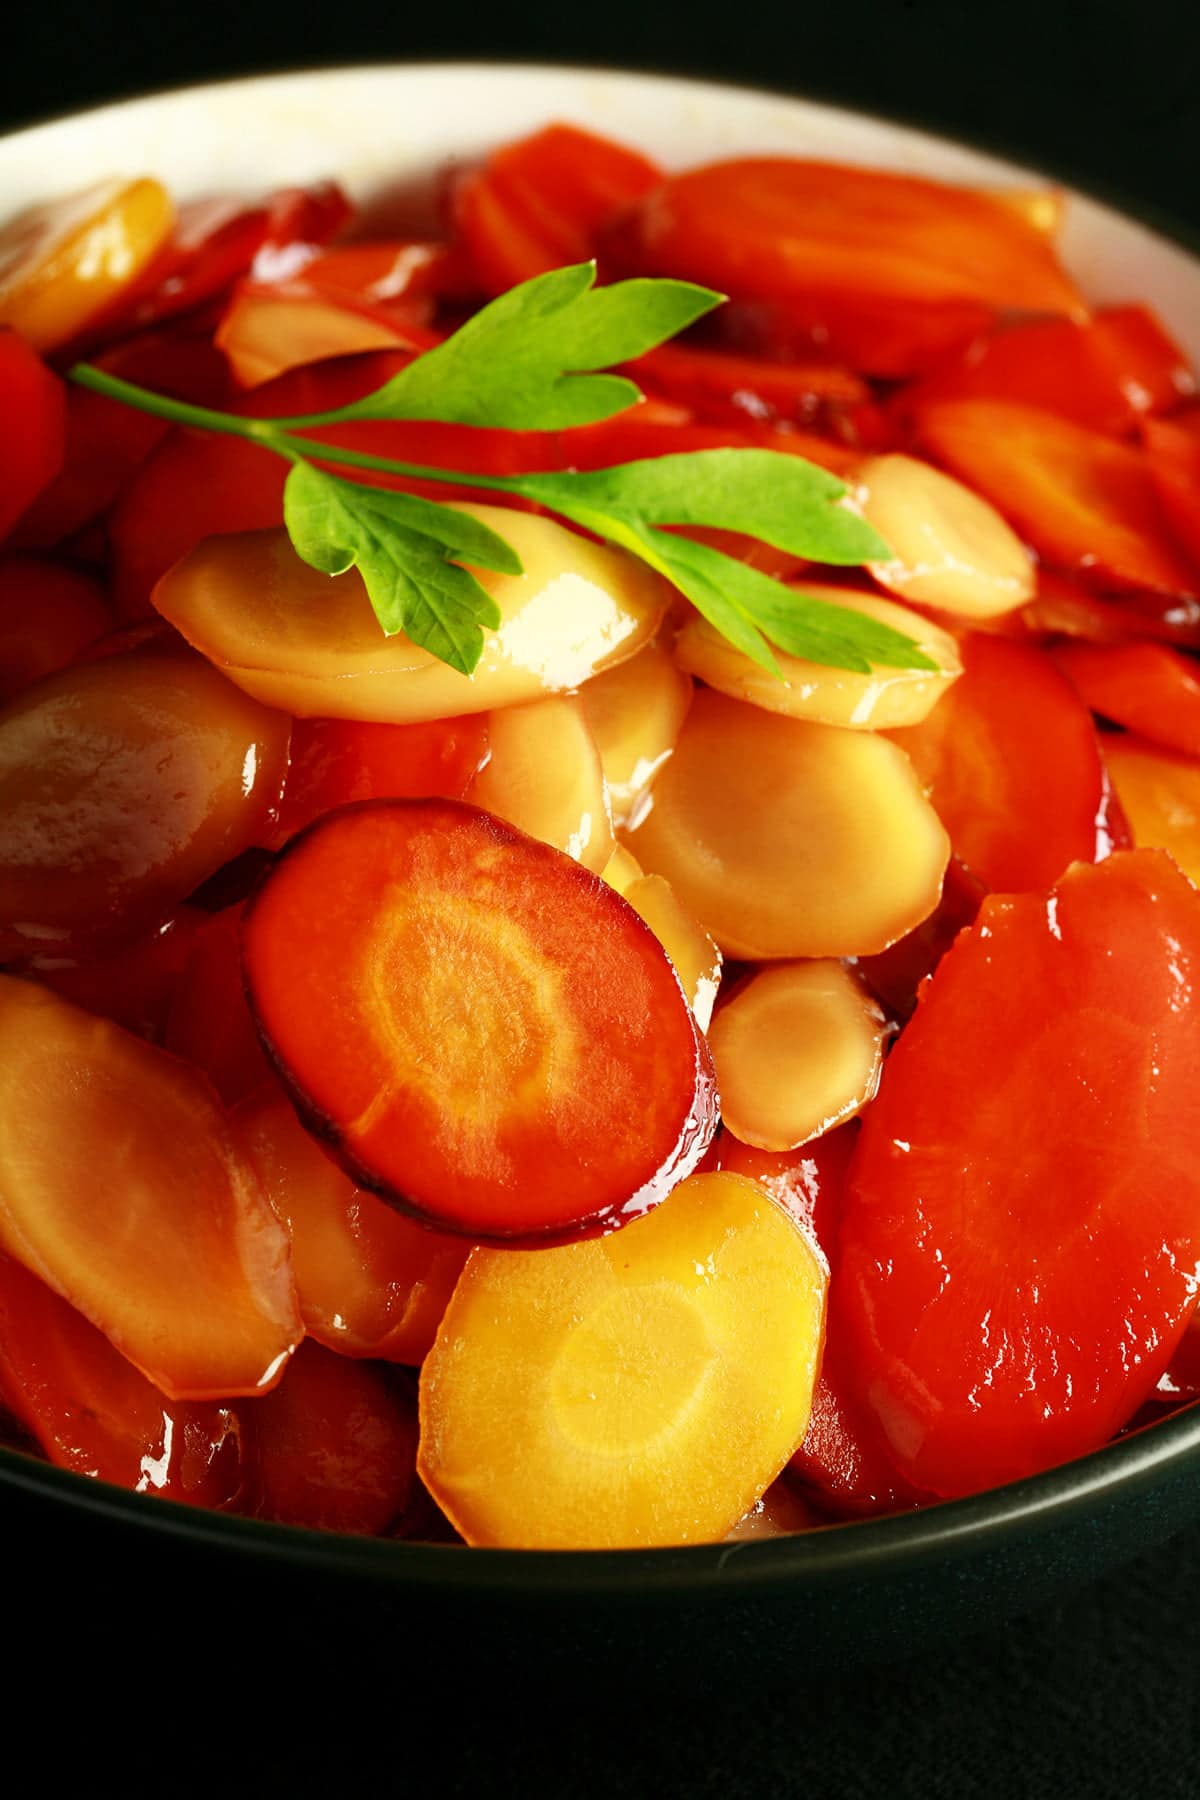 A bowl of brightly coloured carrot slices, in a shiny glaze. There is a small piece of flat leaf parsley on top, as garnish.